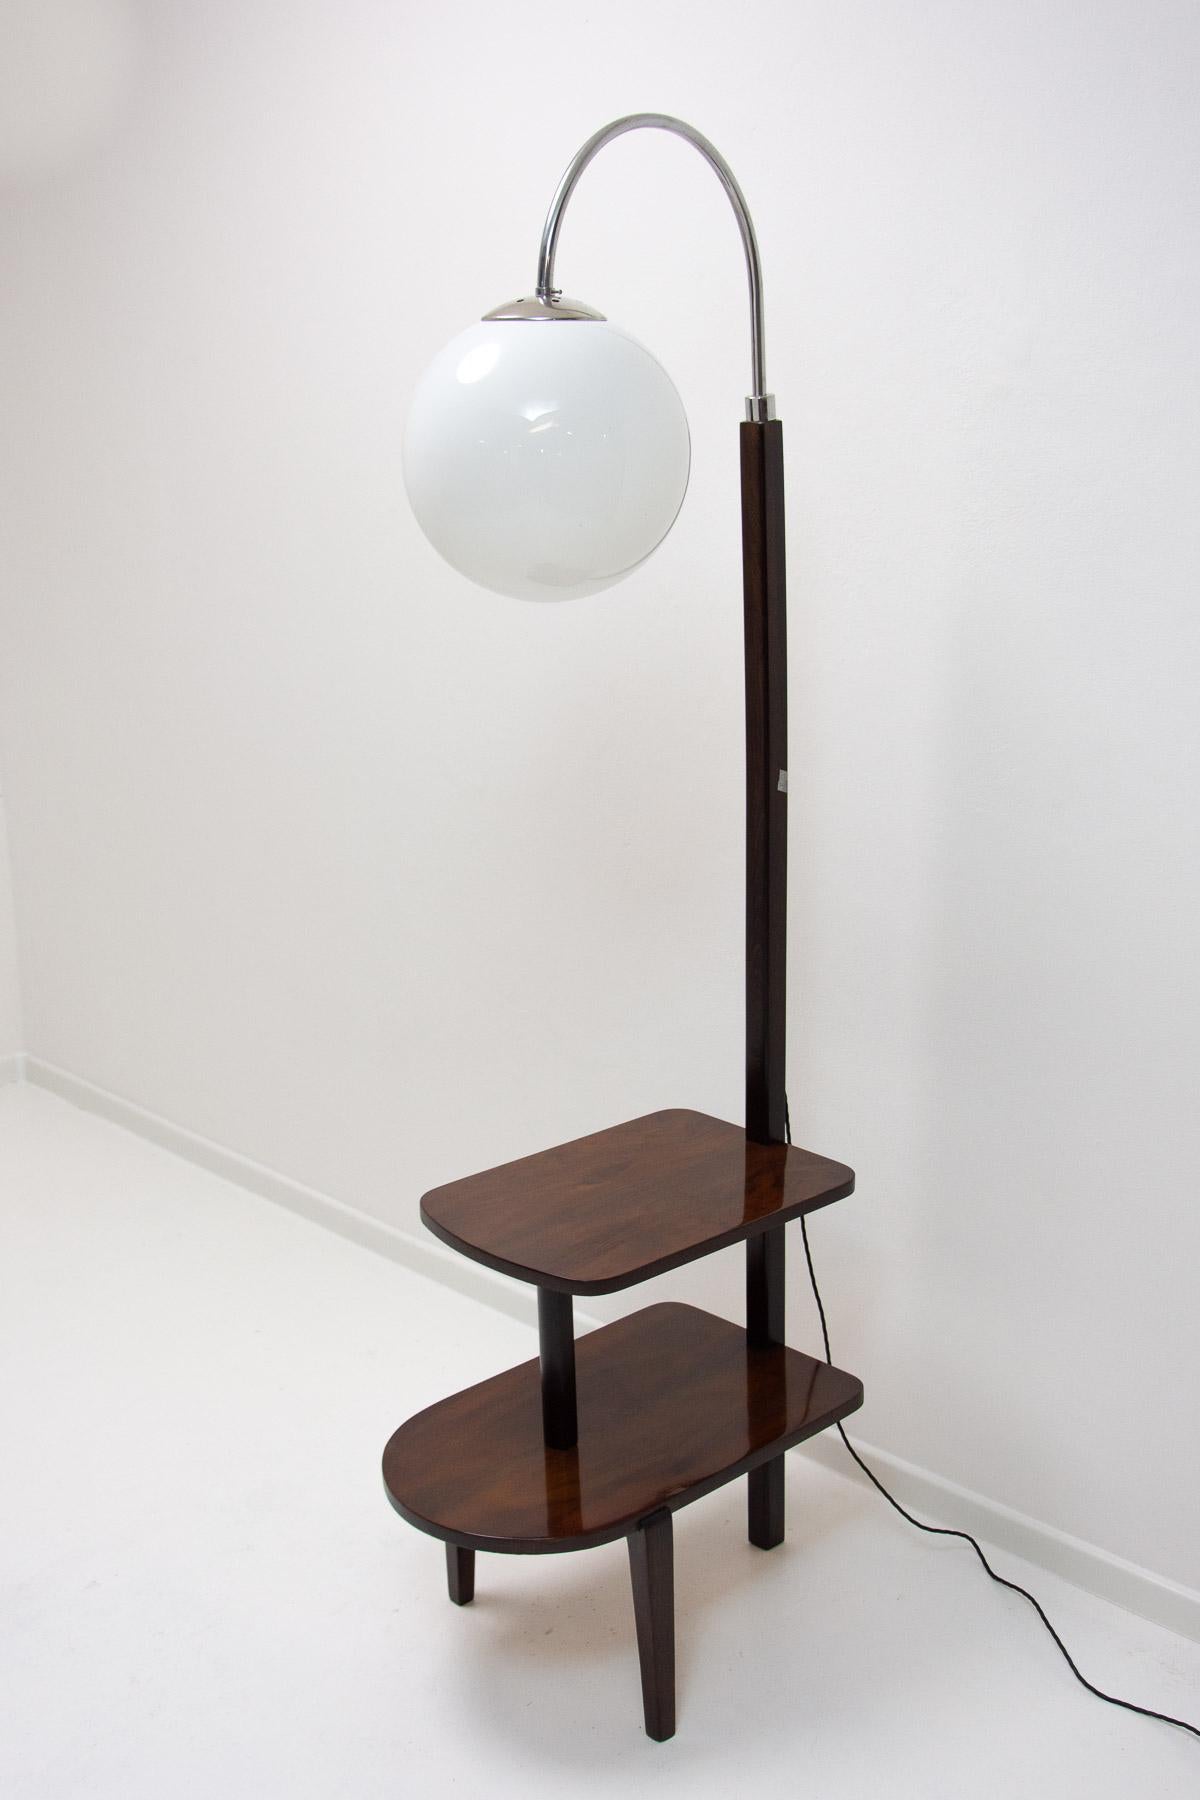 Thonet floor lamp, cataloque No. D-623, ART DECO furniture, made in Bohemia in 1920/1930´s.  Chrome-plated rod with a wooden part – walnut wood.  Can be used also as a side table or nightstand. Fully restored, new wiring, in high gloss finish. 